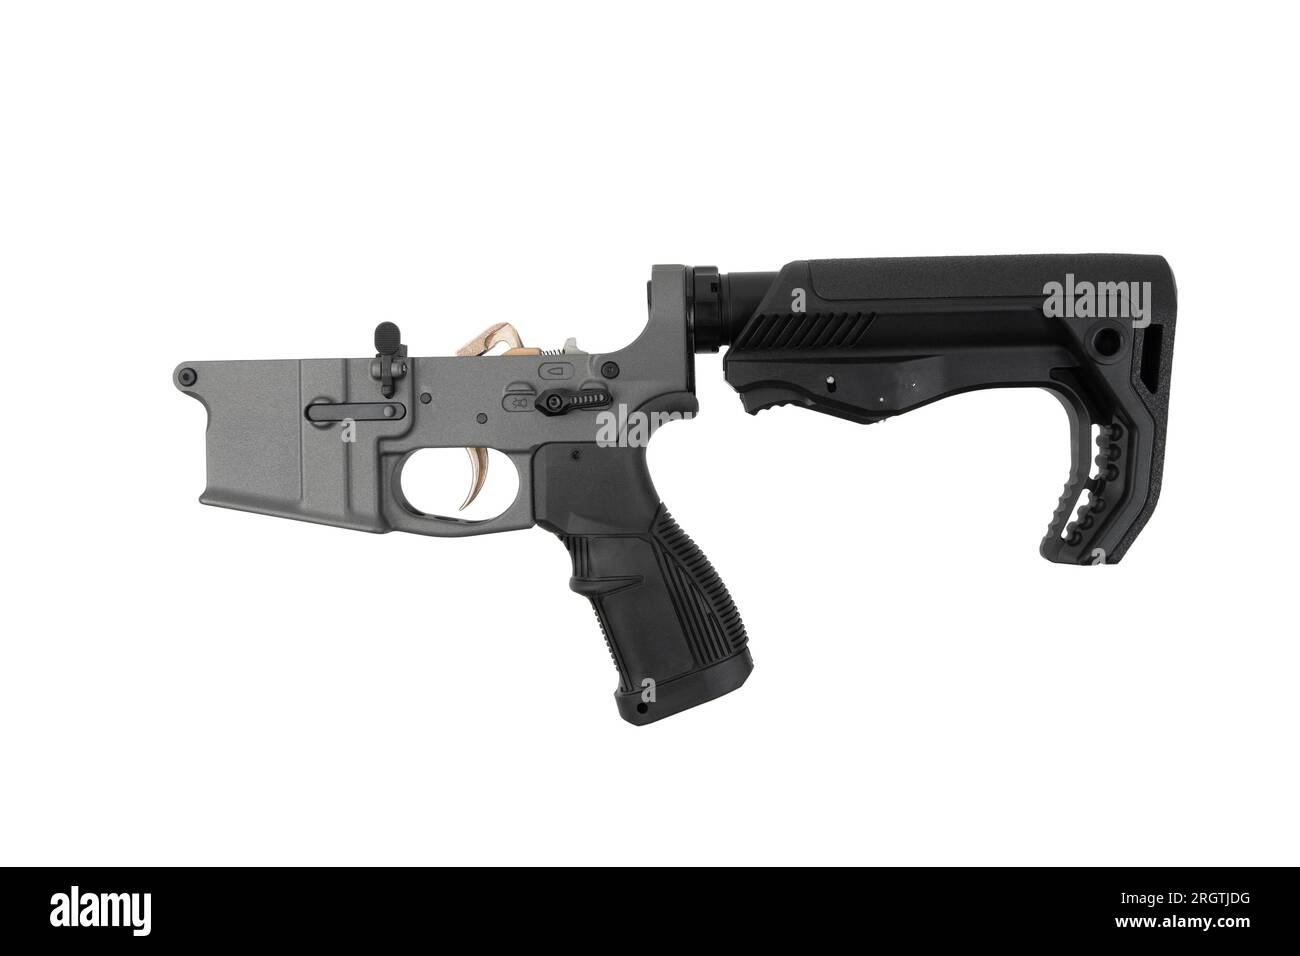 AR15 lower receiver iand buffer spring. Bottom half of a modern assault rifle. Isolate on white background. Stock Photo